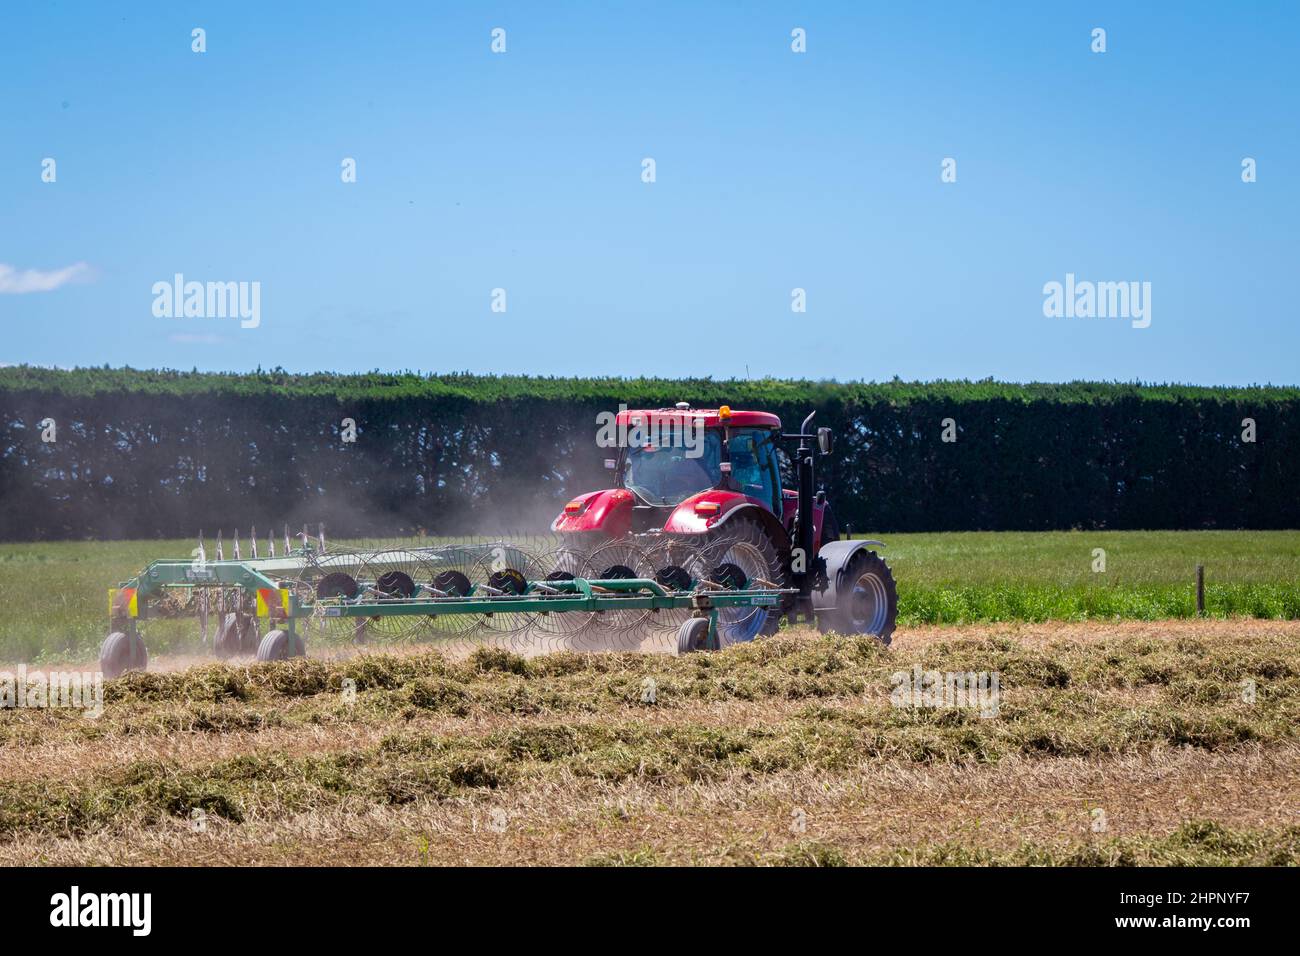 Canterbury, New Zealand, 26 December 2021: A Case tractor pulls a hay rake around a farm field raking the mown grass into rows for the hay baler Stock Photo